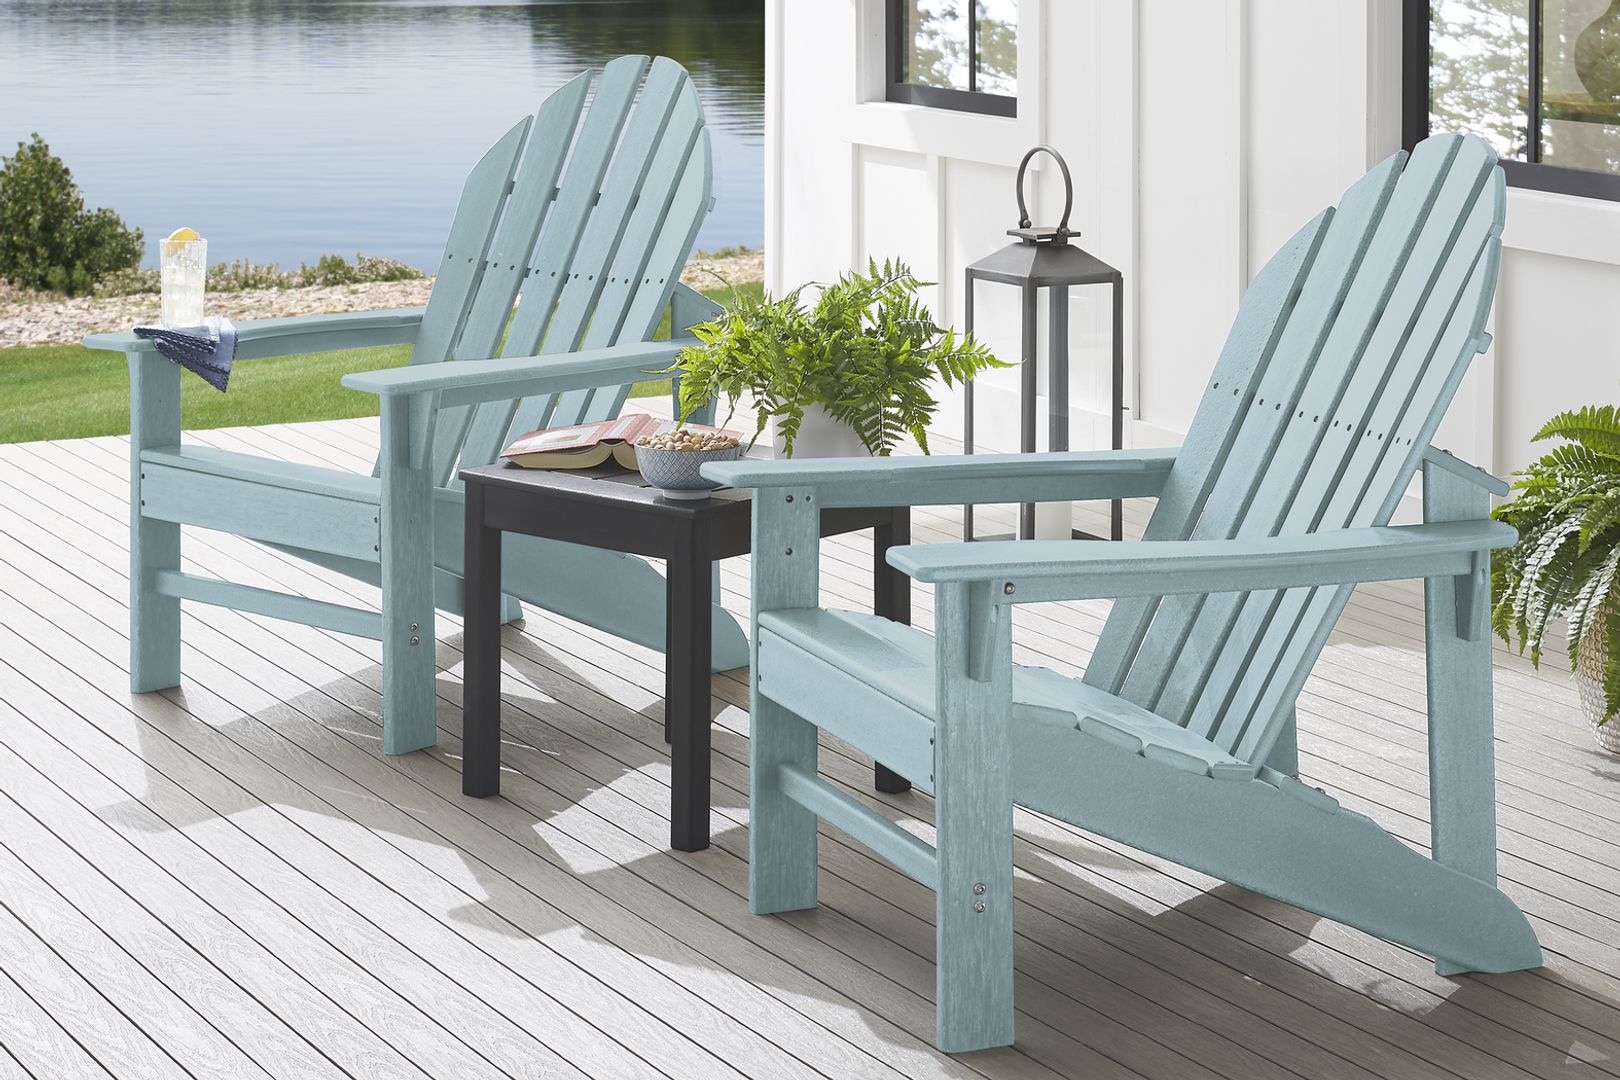 photo of set of two blue wooden Adirondack chairs